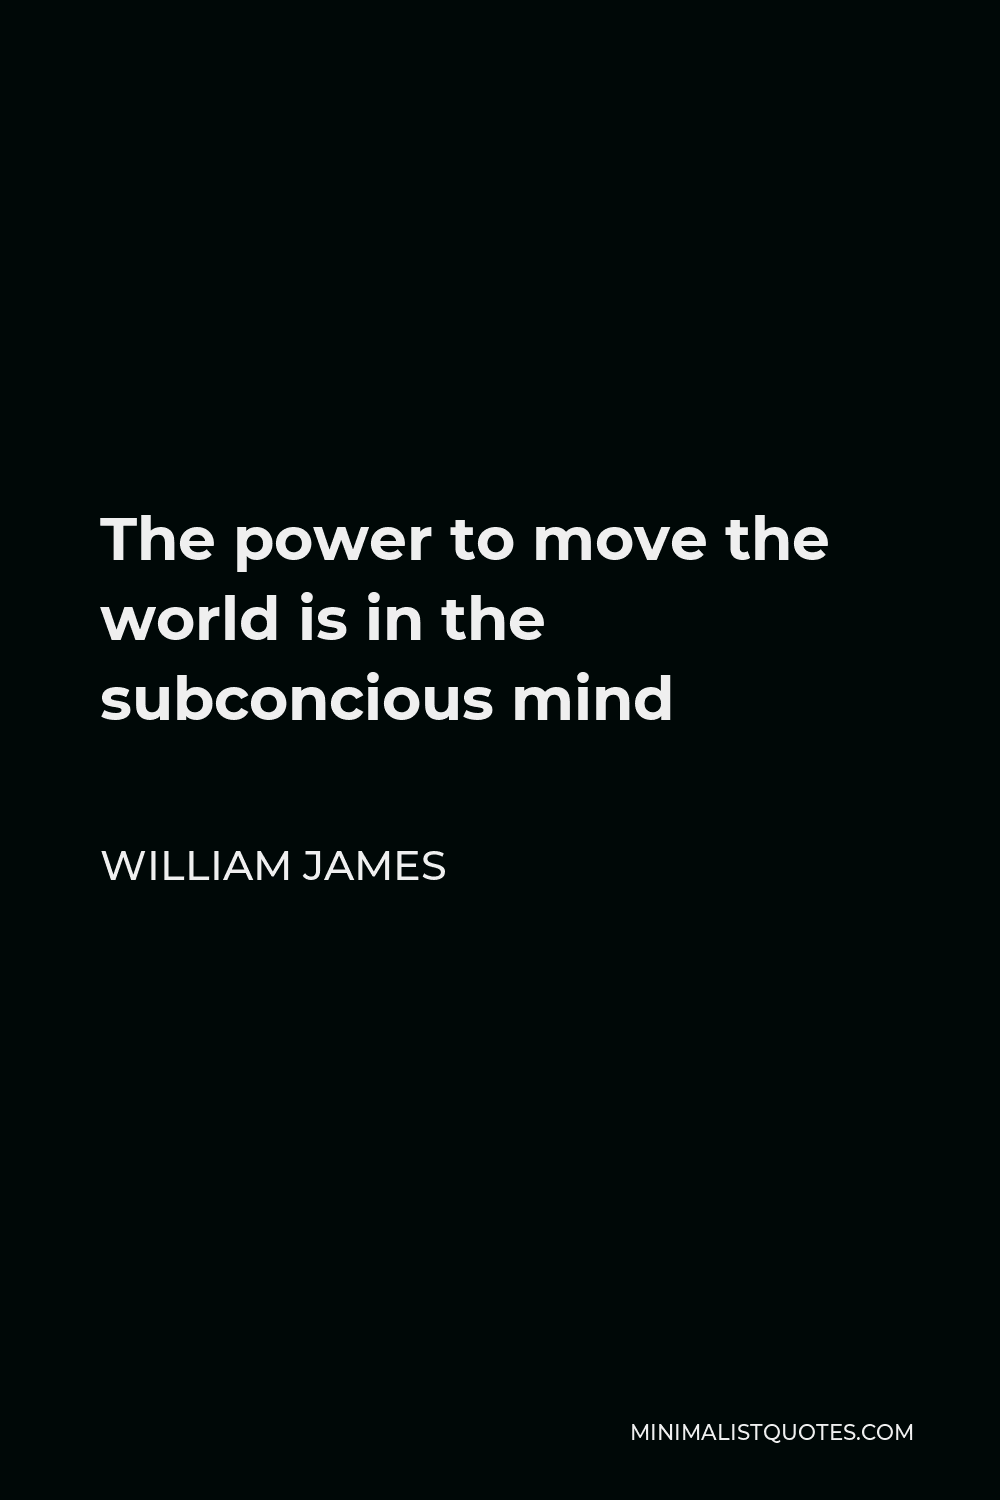 William James Quote - The power to move the world is in the subconcious mind